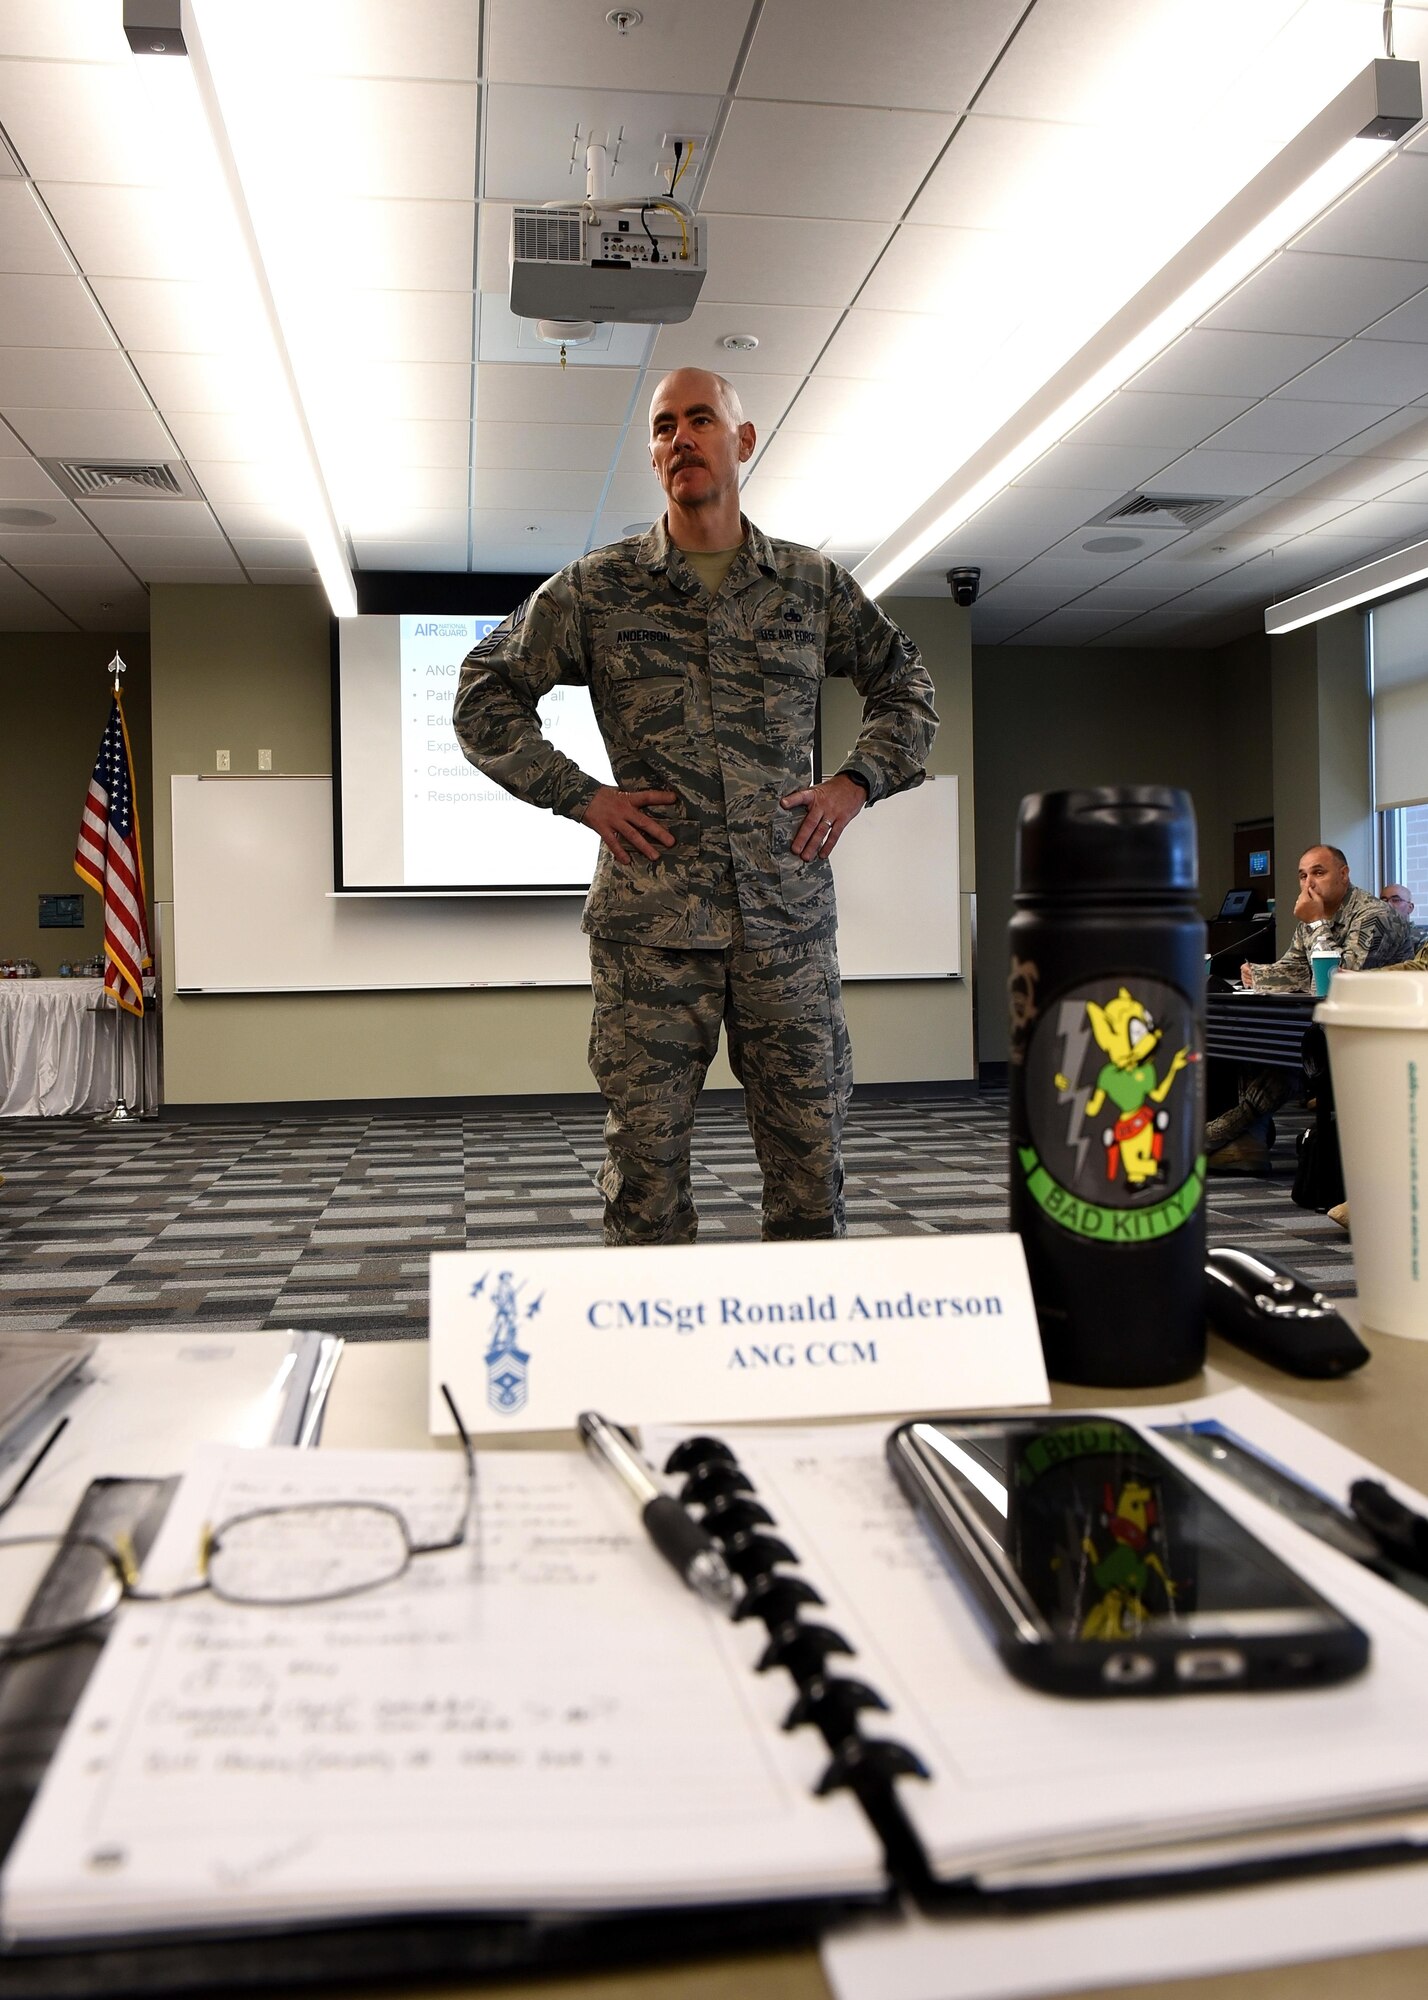 The Command Chief Master Sergeant of the Air National Guard, Chief Master Sgt. Ron Anderson speaks with the Army and Air National Guard’s top enlisted leaders at the I.G. Brown Training and Education Center, May 2, 2017, in east Tennessee. The National Guard Joint Enlisted Advisory Council (JEAC) met this week to coordinate efforts on issues affecting enlisted Guard members. (U.S. Air National Guard photo by Master Sgt. Mike R. Smith)